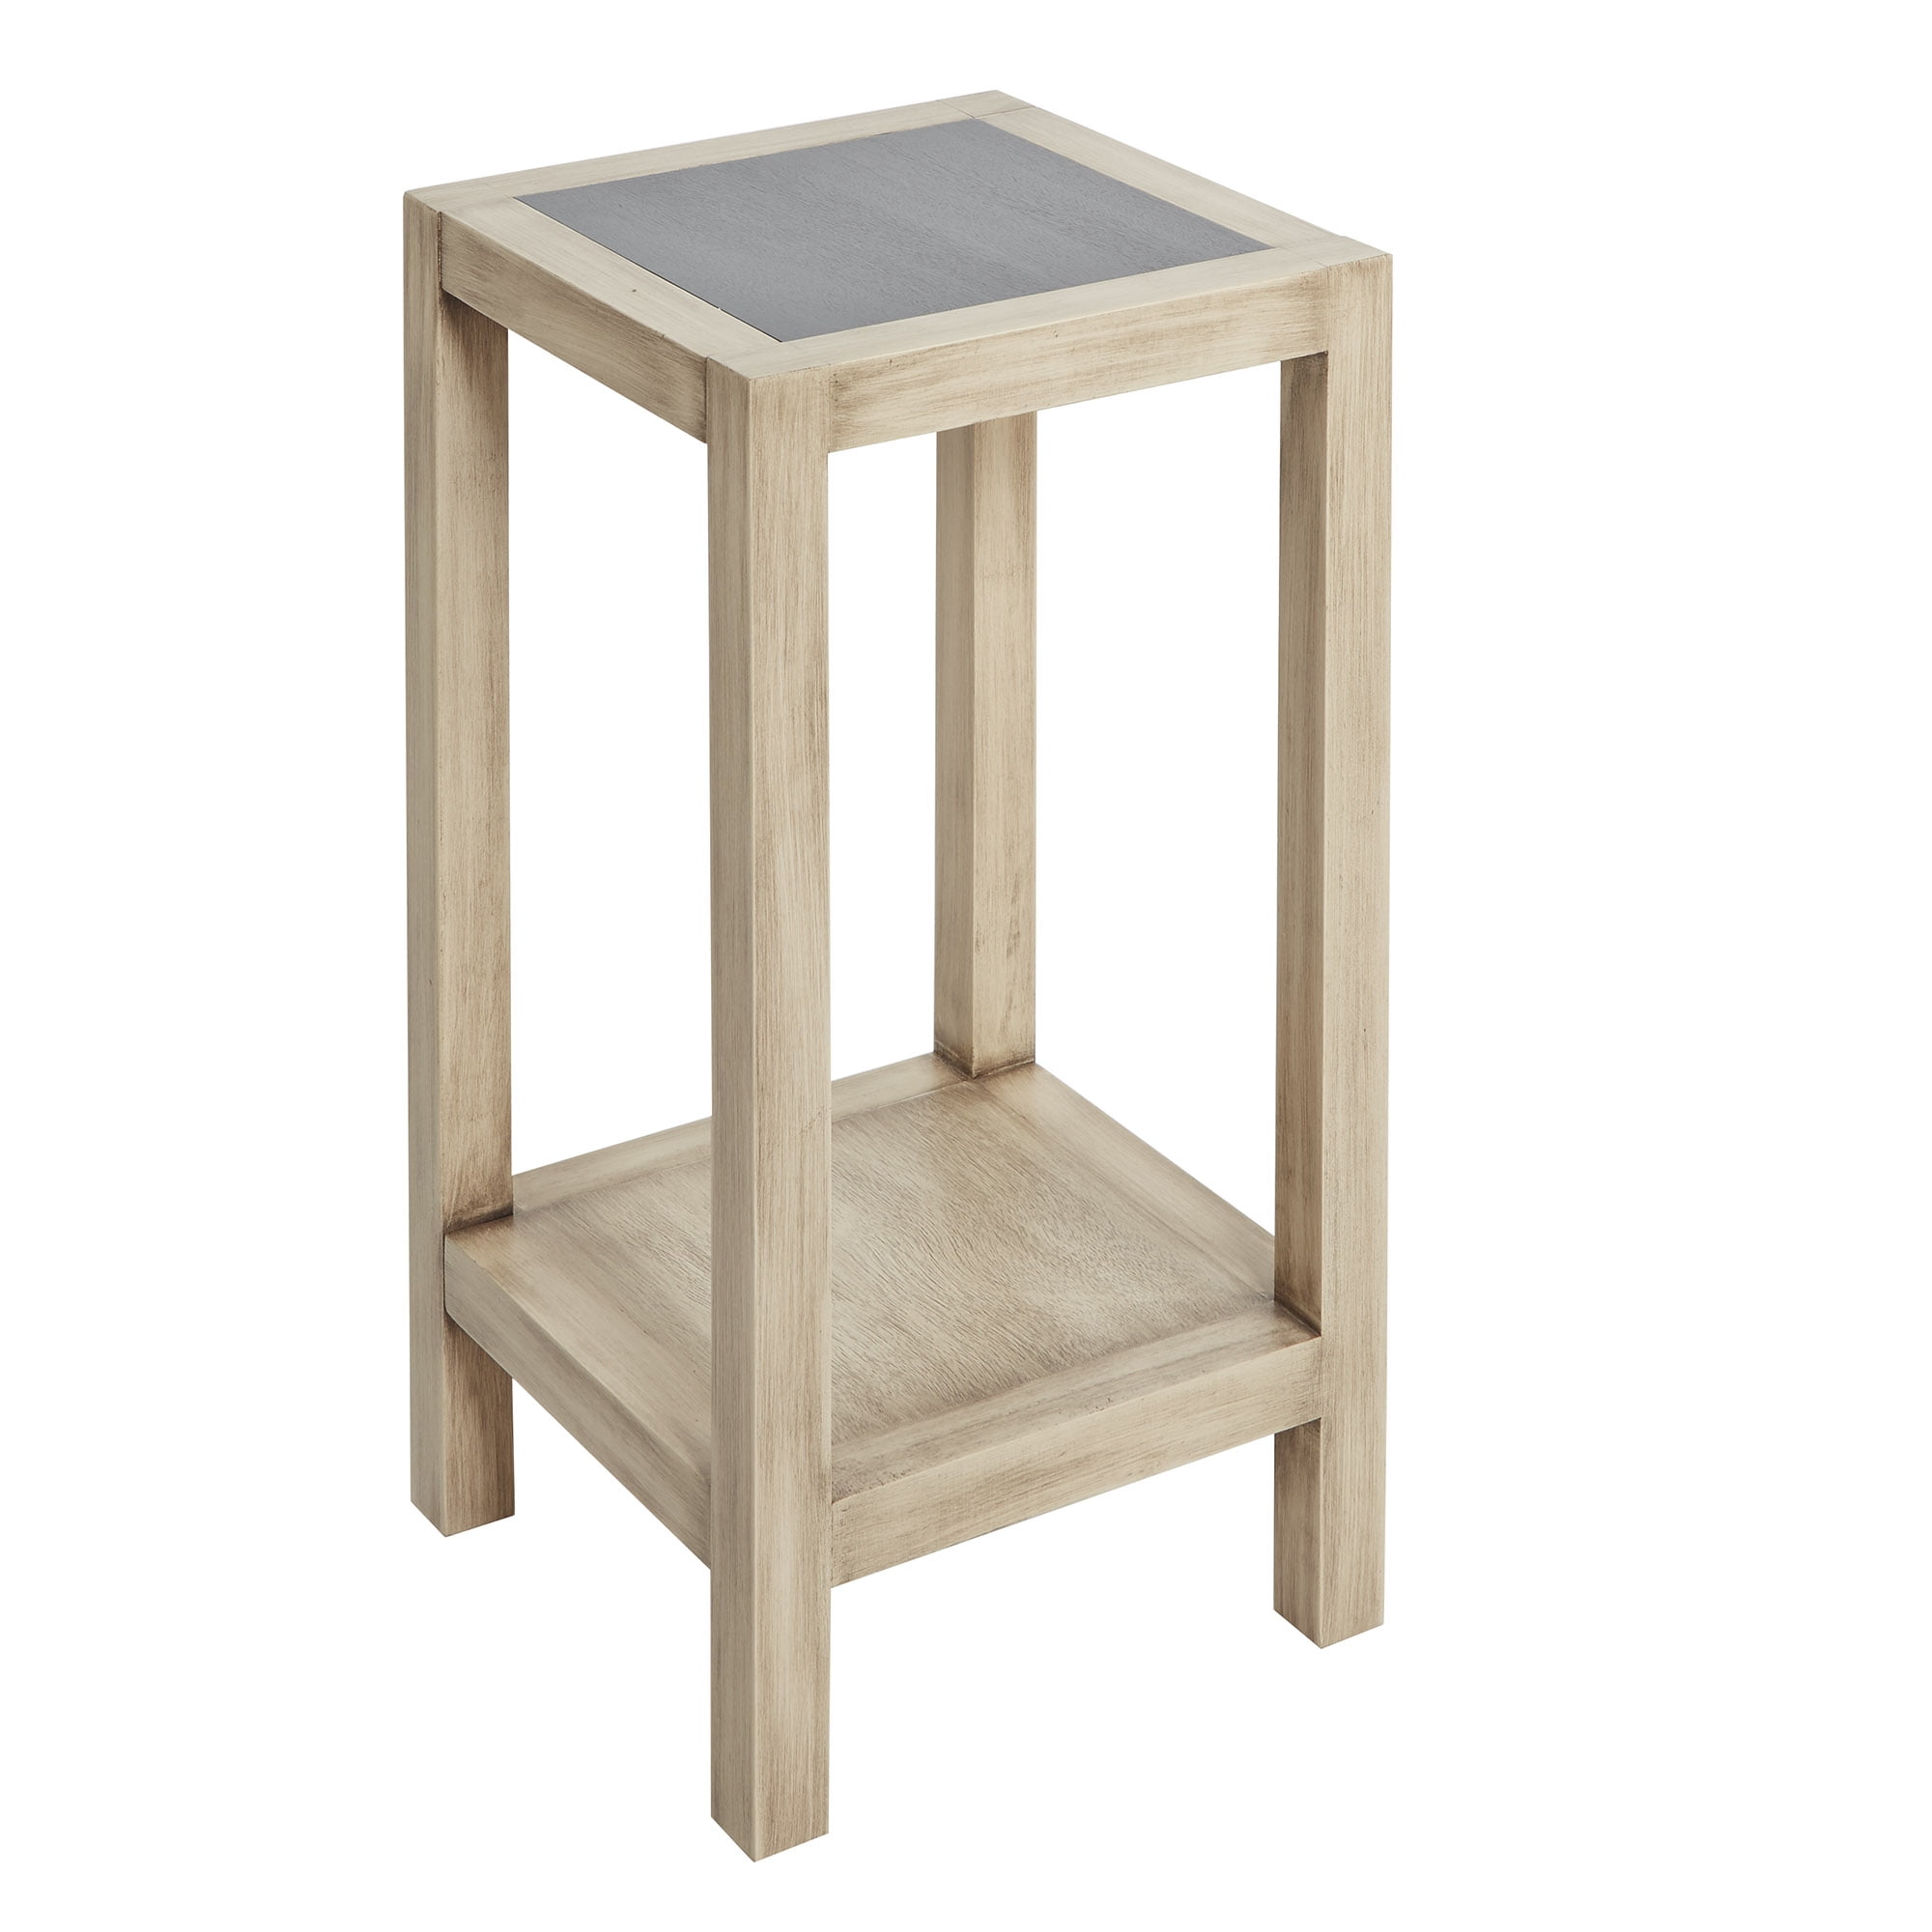 Mallory Wood Square Small Accent Table